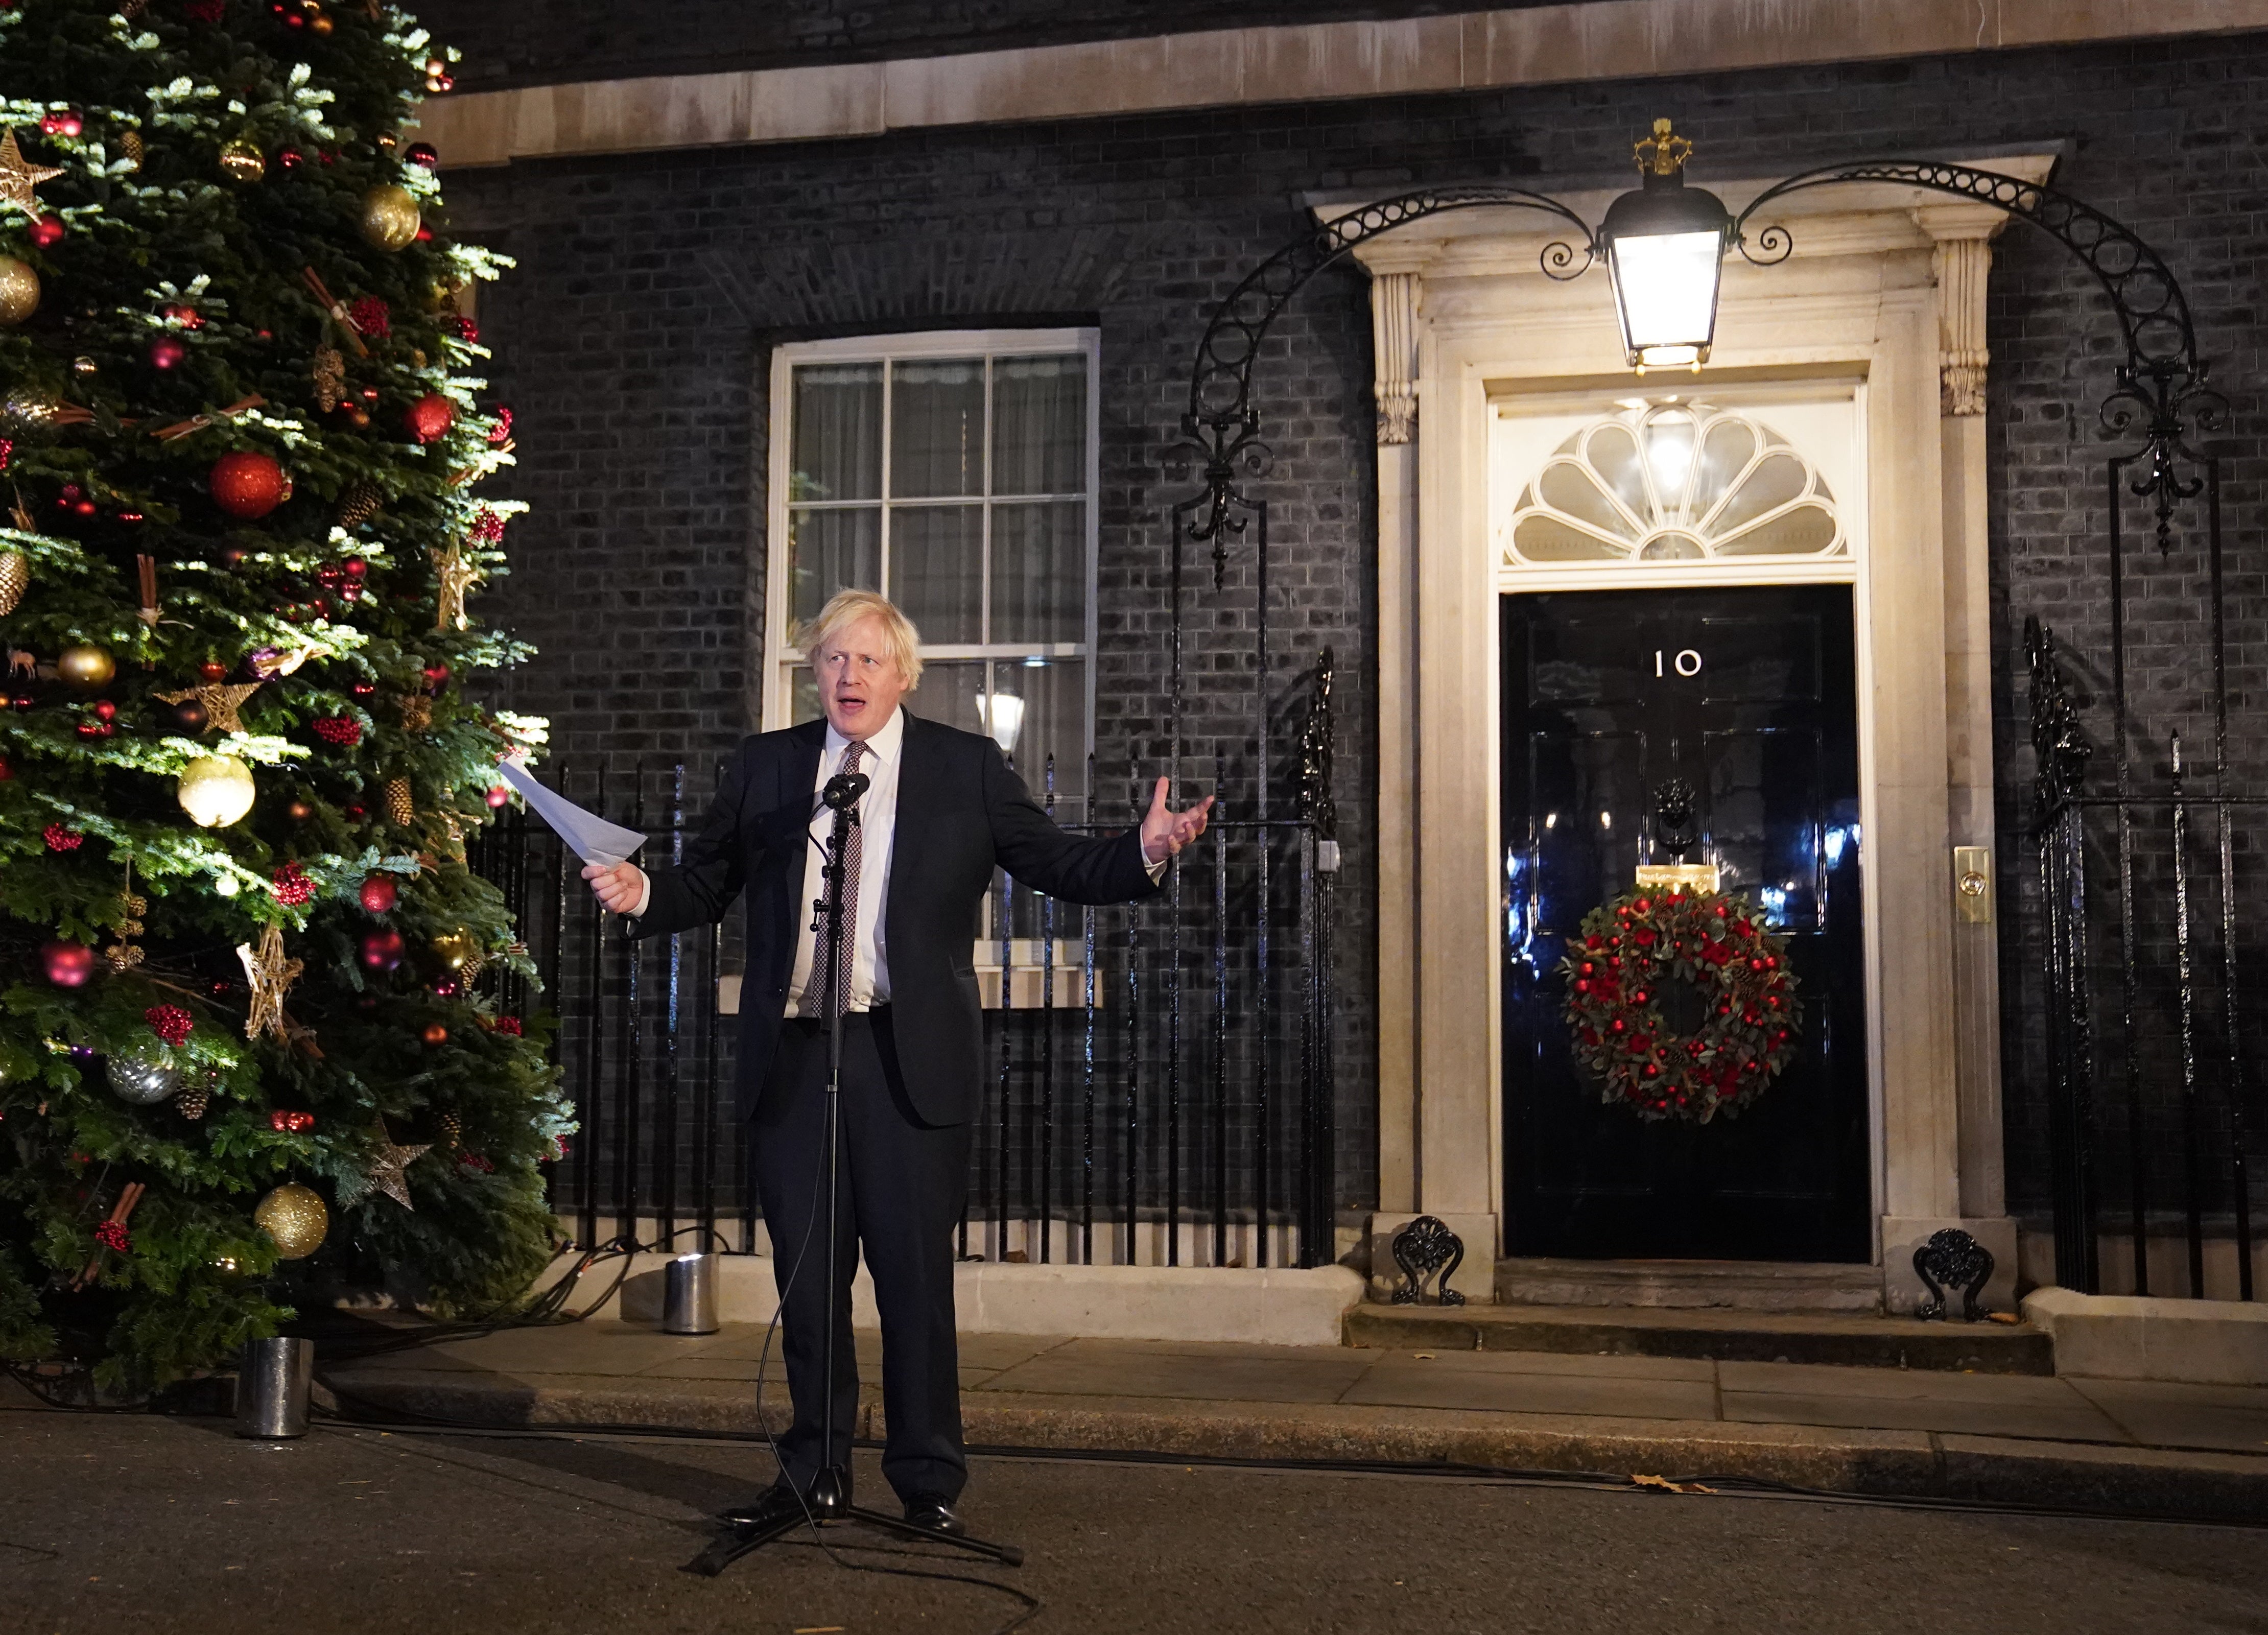 The Prime Minister is alleged to have made speeches at staff leaving events while the November coronavirus lockdown was in place in England (Stefan Rousseau/PA)